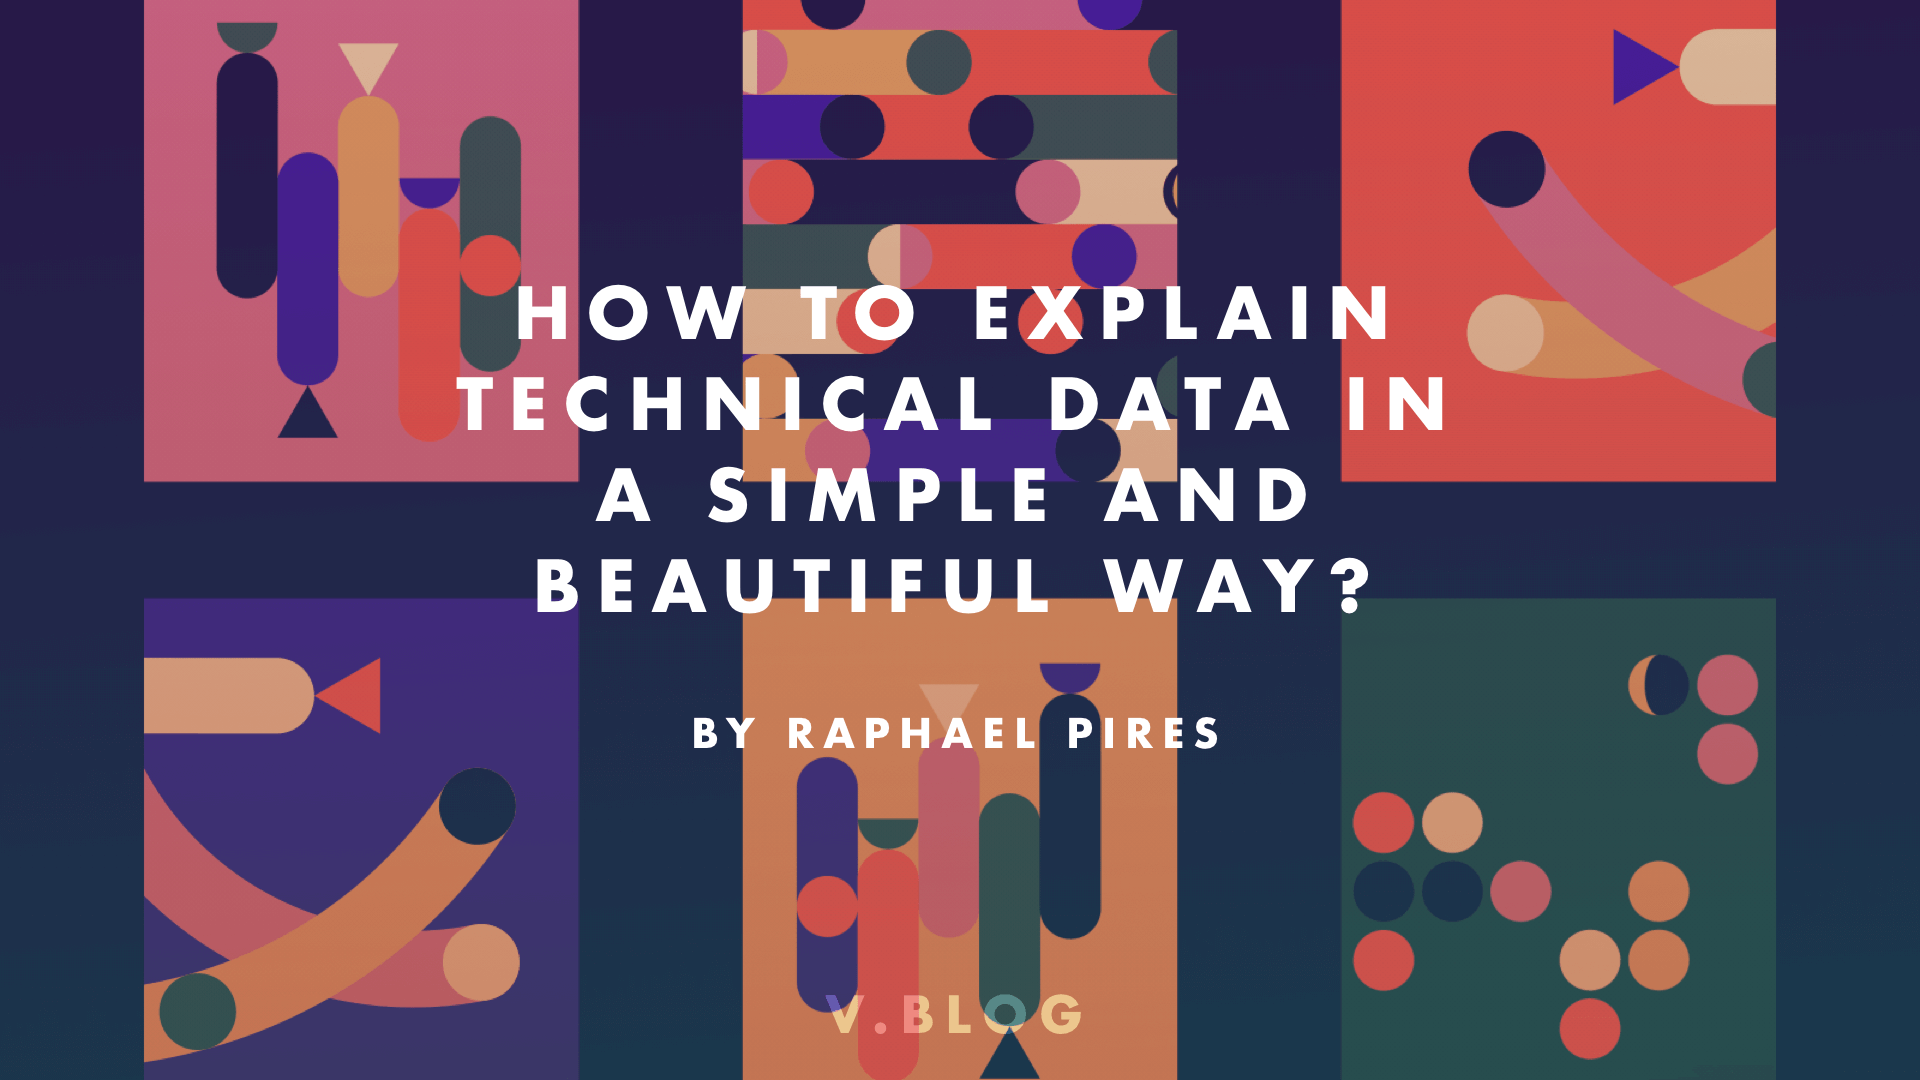 How to explain technical data in a simple and beautiful way | Linearity